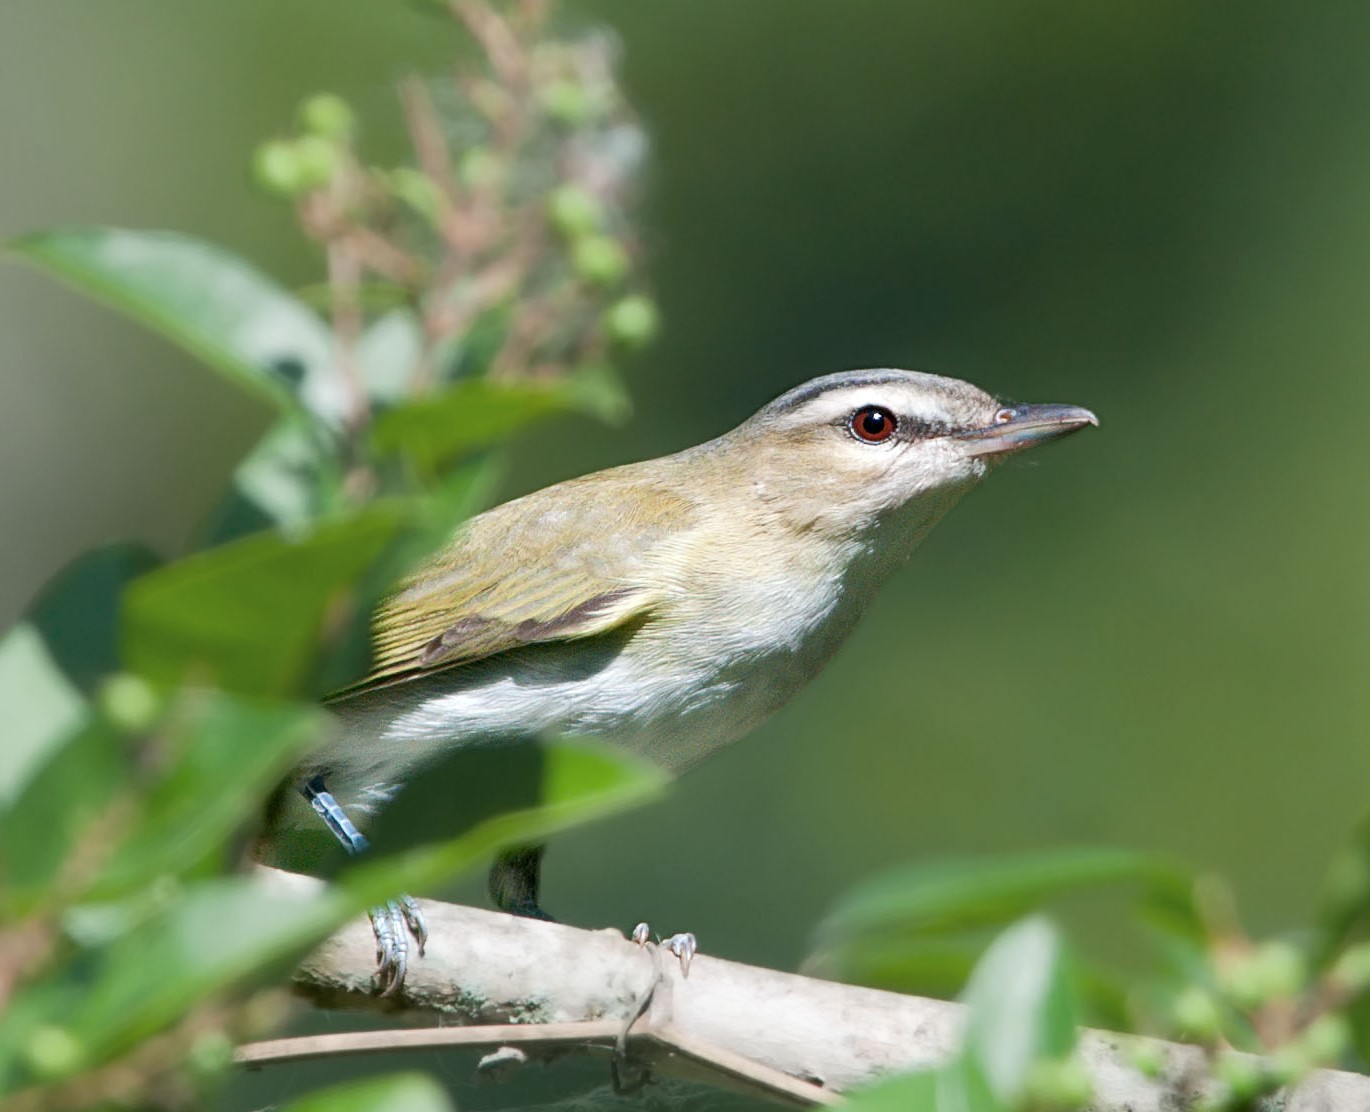 The call-and-answer song of the Red-eyed Vireo may be heard all summer long from the tree tops of Forest Park. Photo: Kelly Colgan Azar/CC BY-ND 2.0